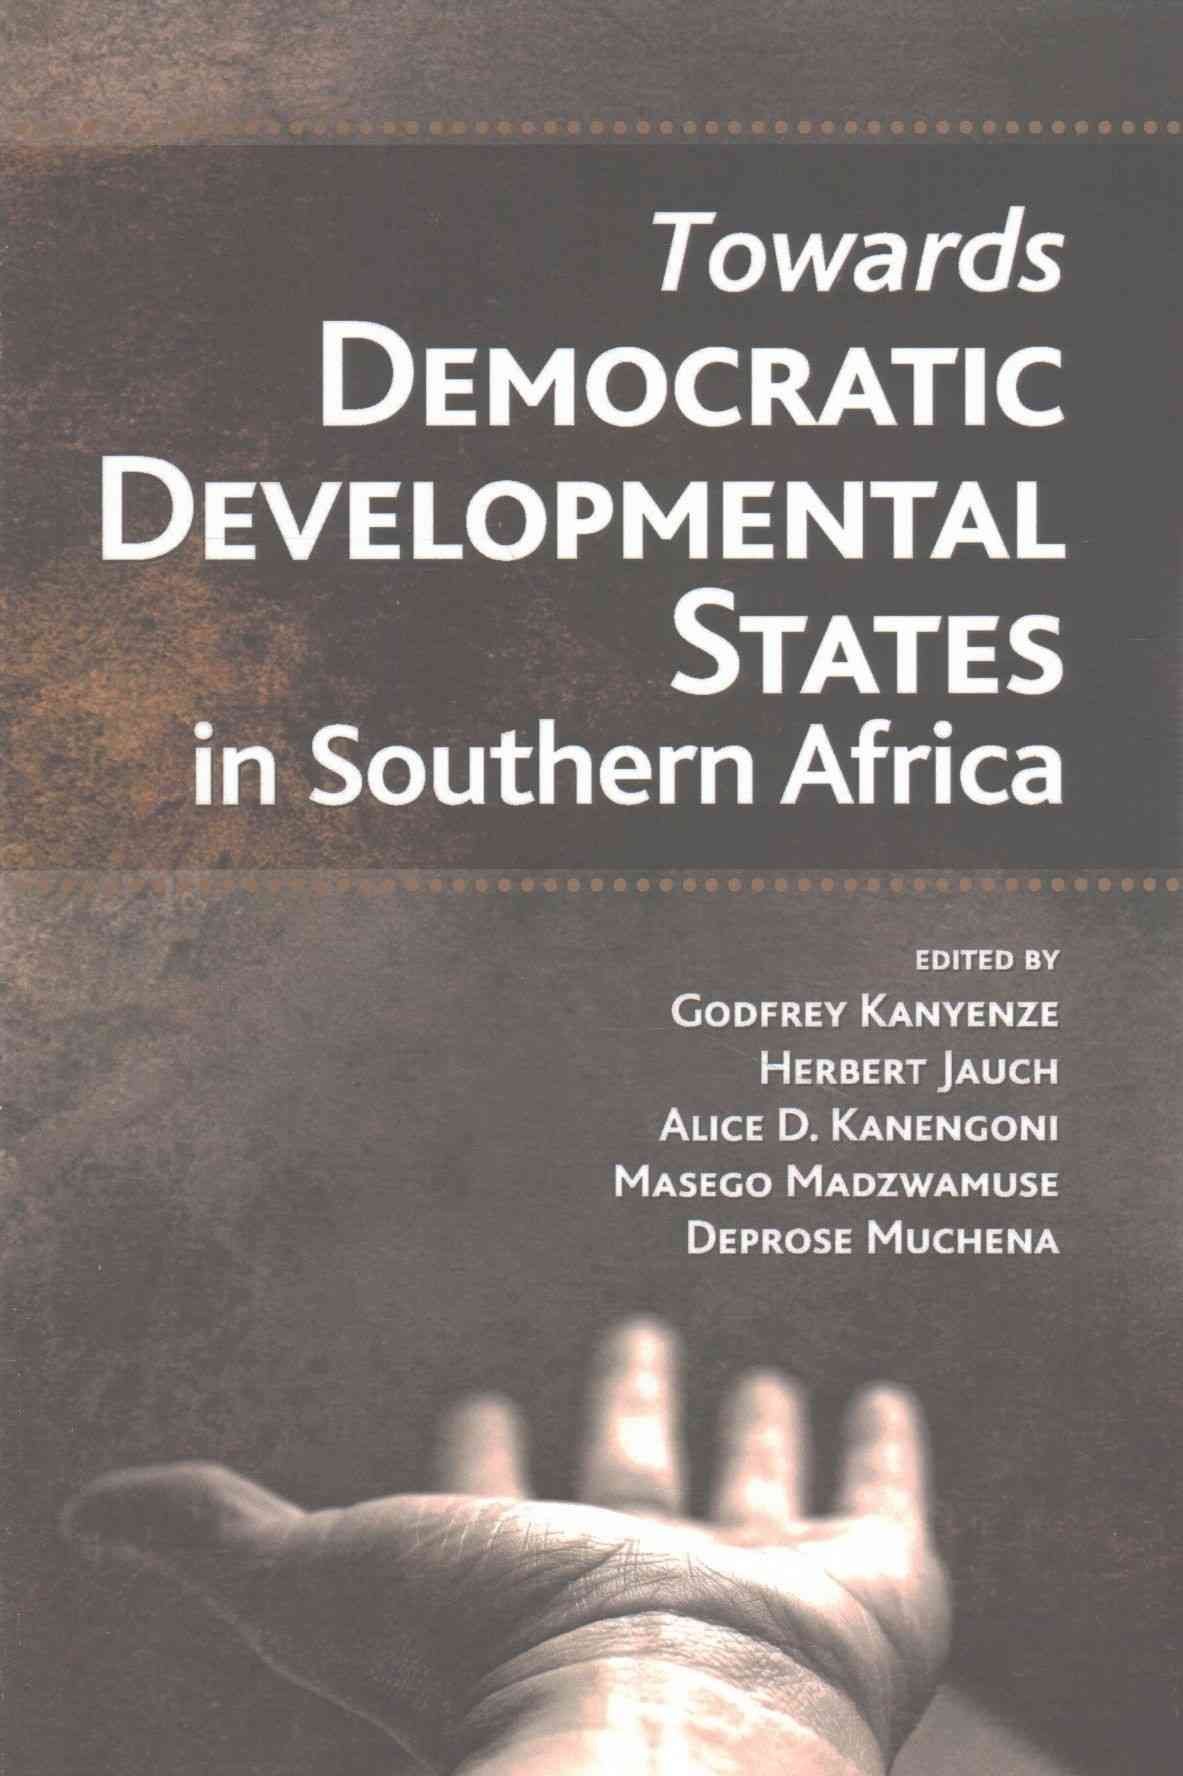 Towards Democratic Development States in Southern Africa